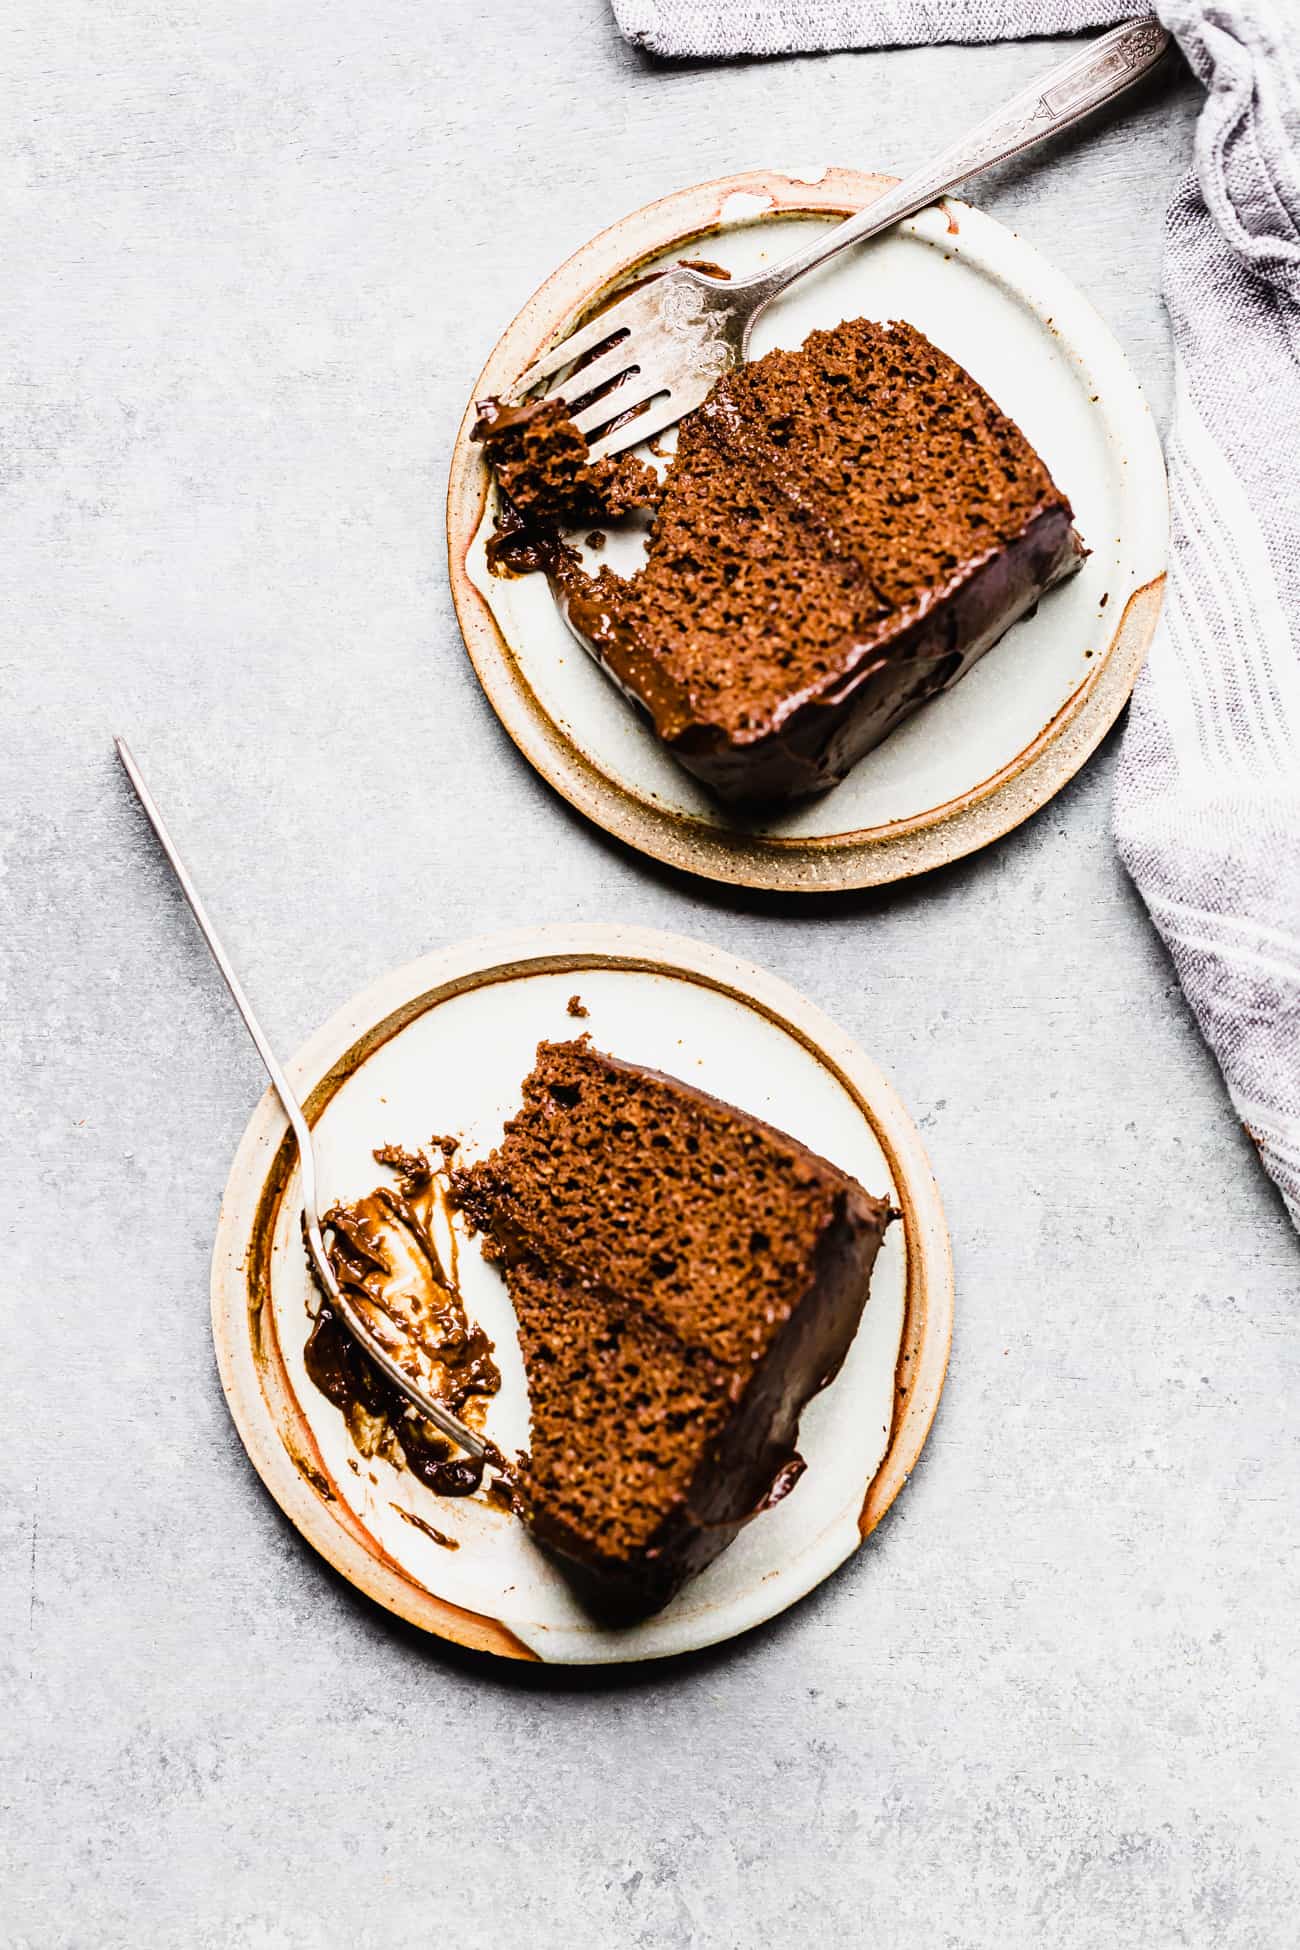 two pieces of chocolate cake on plates with forks on the side